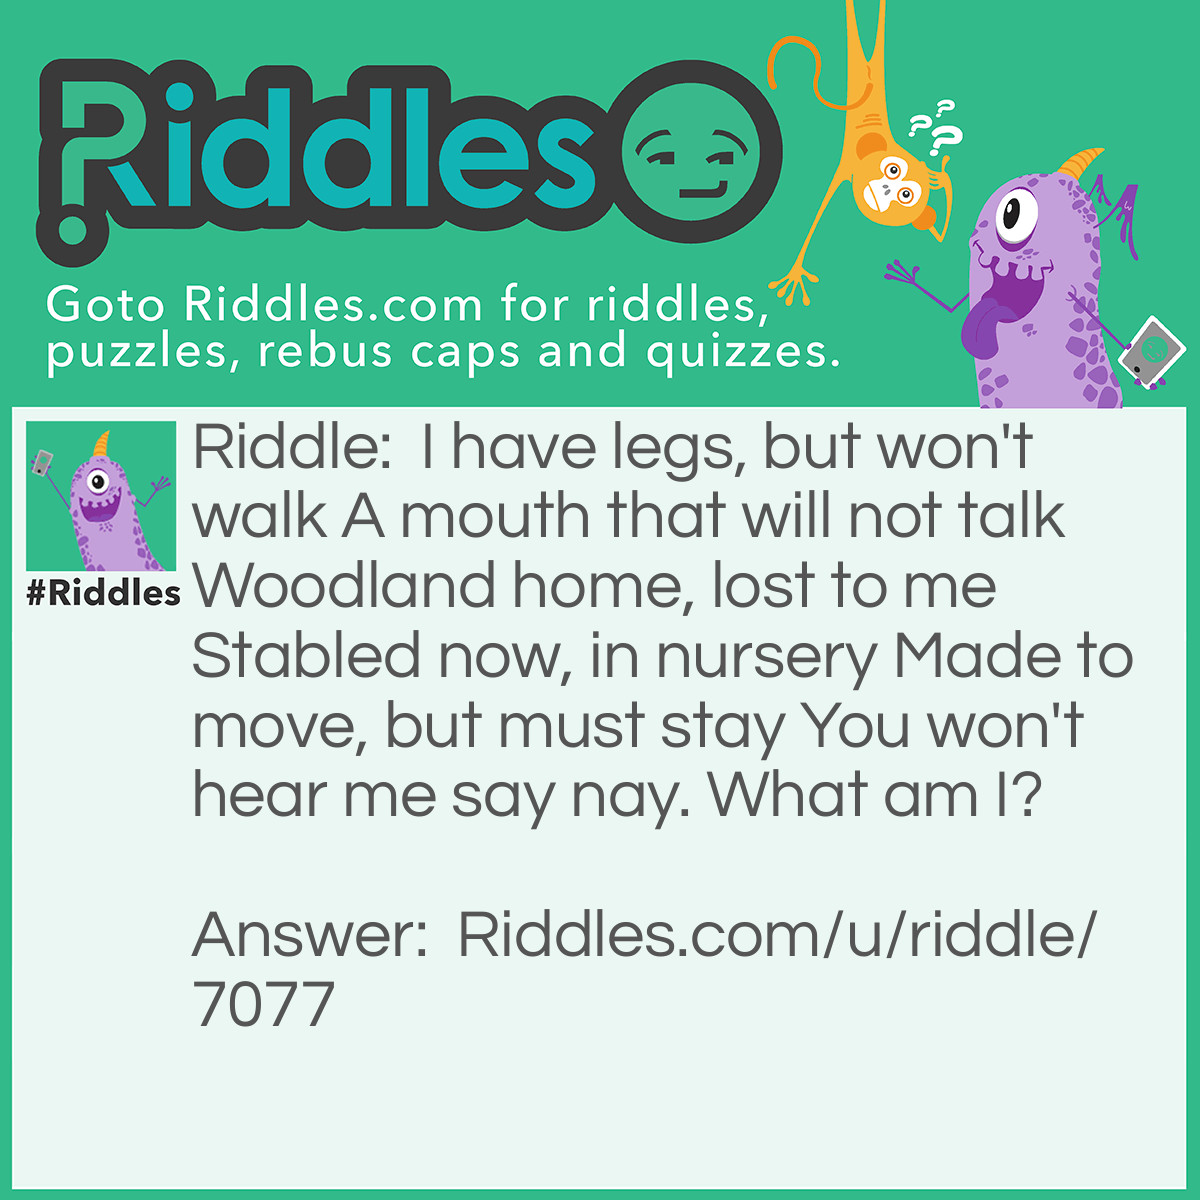 Riddle: I have legs, but won't walk 
A mouth that will not talk 
Woodland home, lost to me 
Stabled now, in nursery 
Made to move, but must stay 
You won't hear me say nay. 
What am I? Answer: Rocking horse.